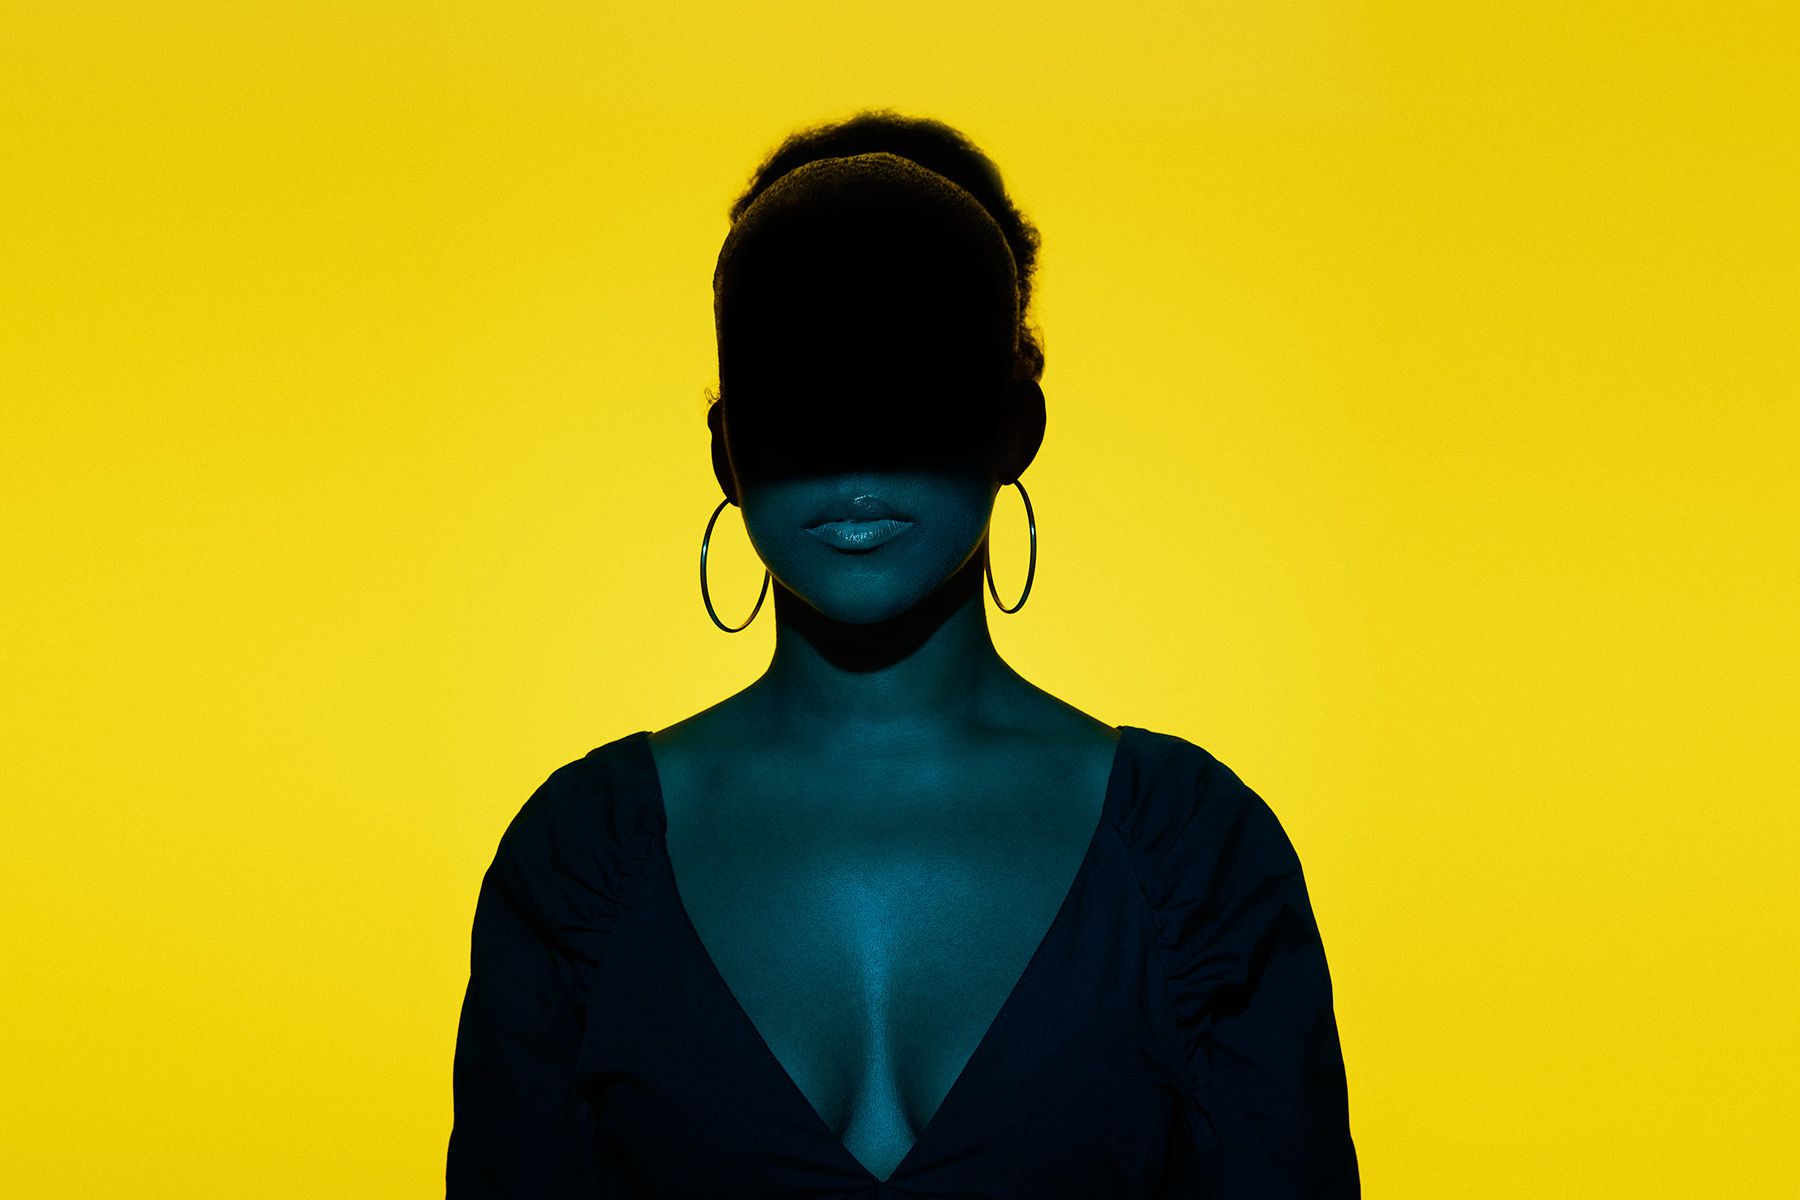 A photo of Jade LB, the anonymous author of Keisha the Sket, with the upper half of her face in shadows, shot against a yellow background.